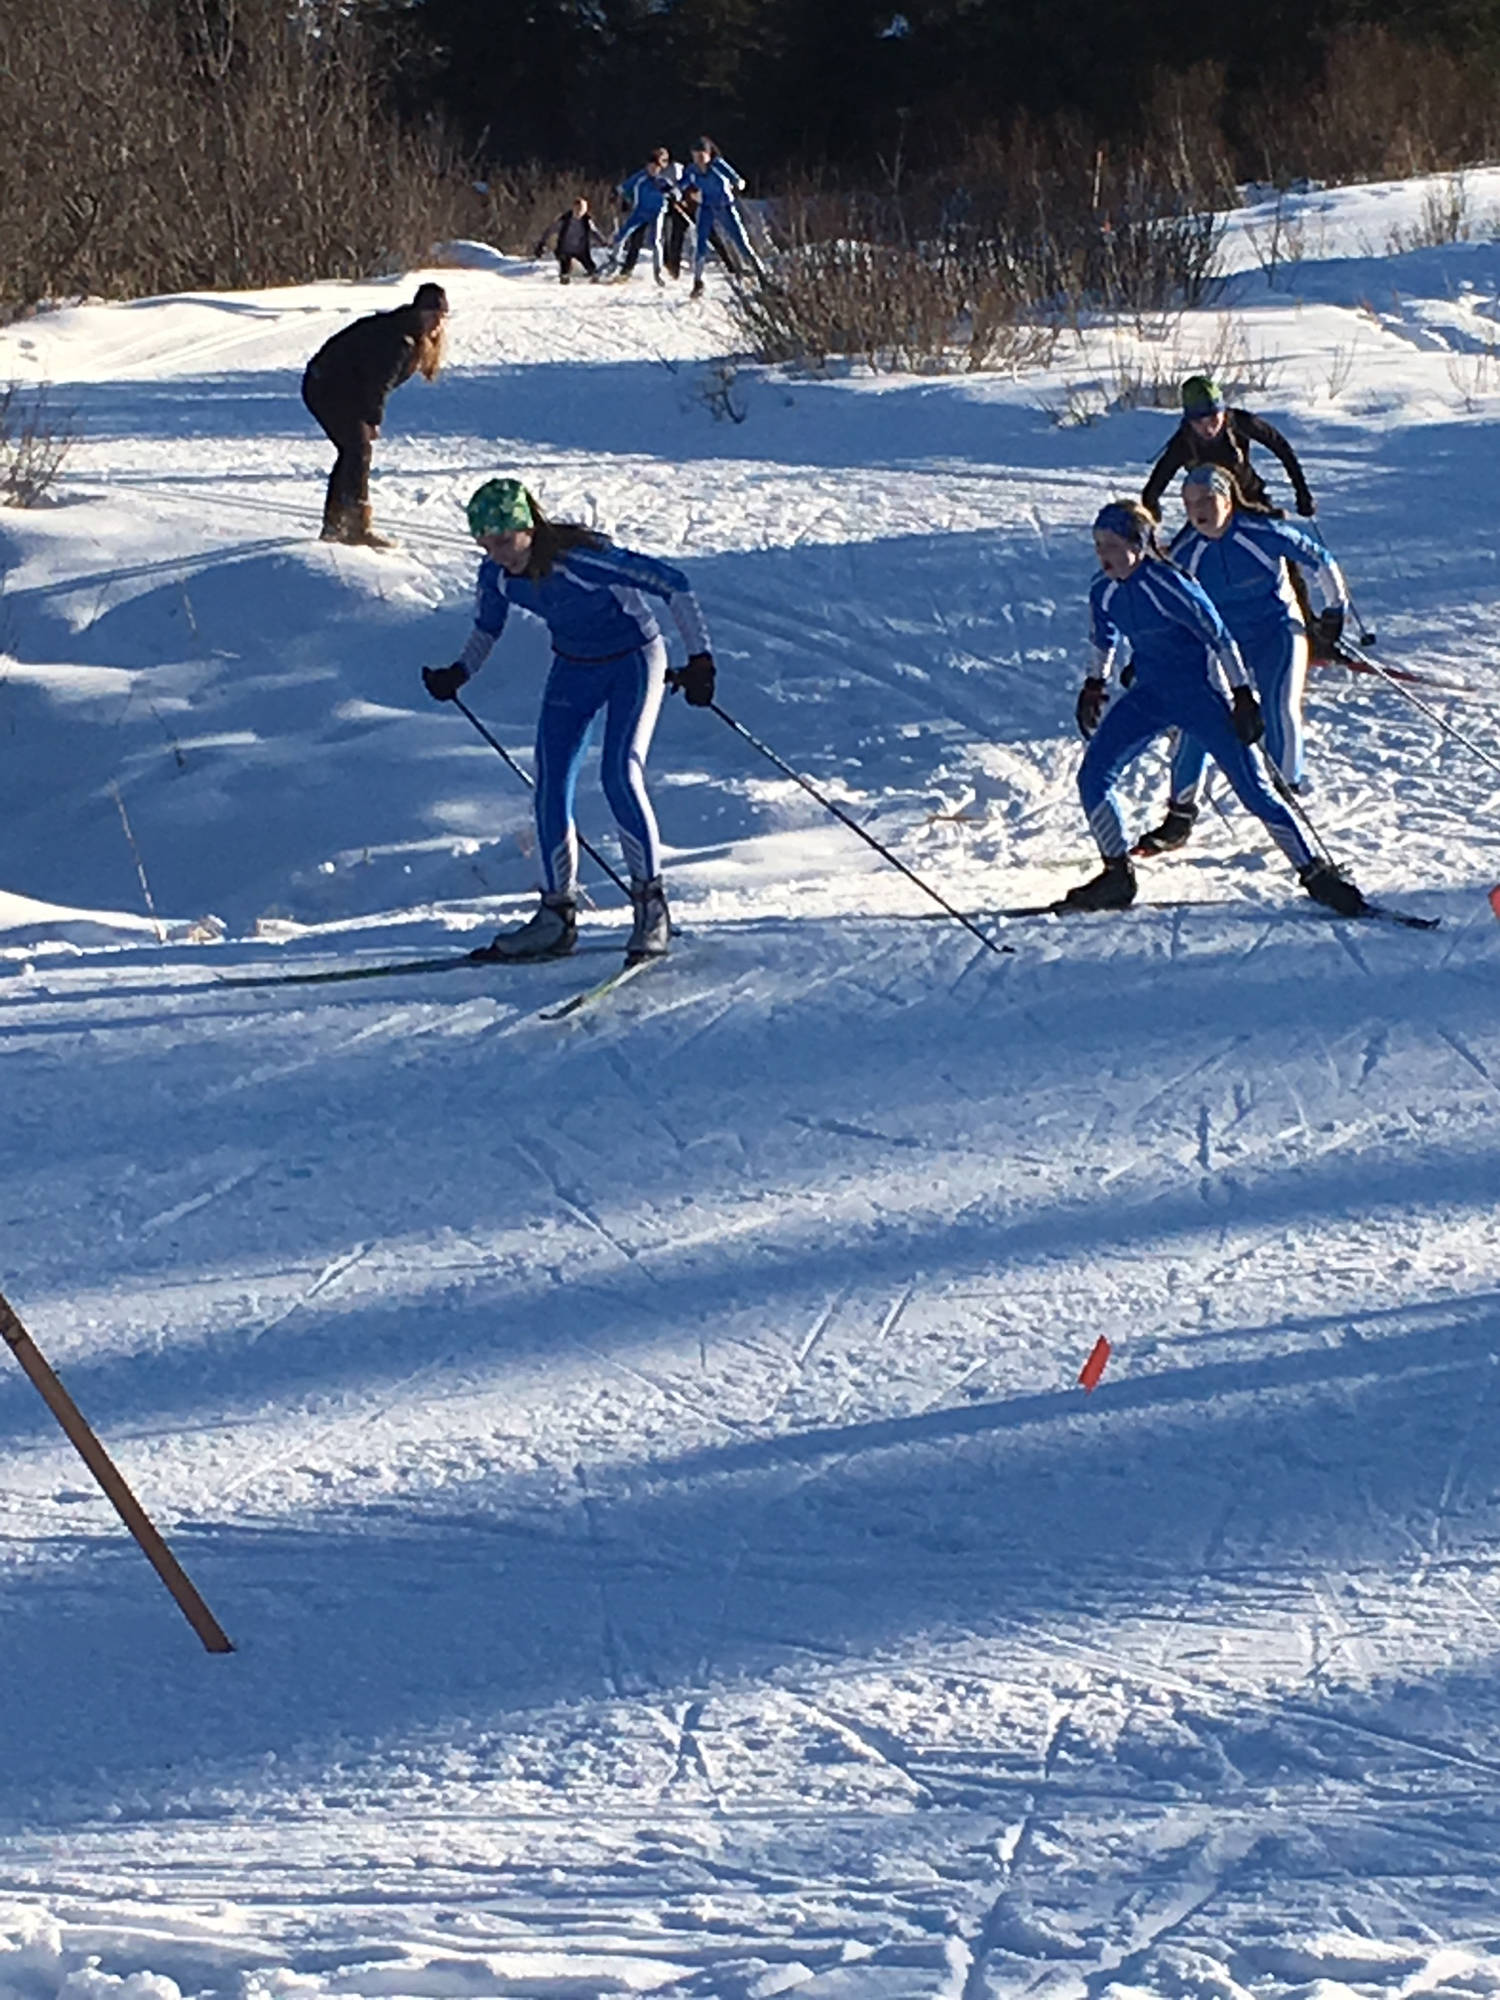 Homer Middle School cross-country skiers Delta Fabich, Hannah Stonorov and Olivia Glasman (foreground), and Delilah Harris and Eryn Field (background) race about the course Friday, Feb. 16 at the Lookout Mountain Ski Trails near Homer, Alaska. (Photo submitted)